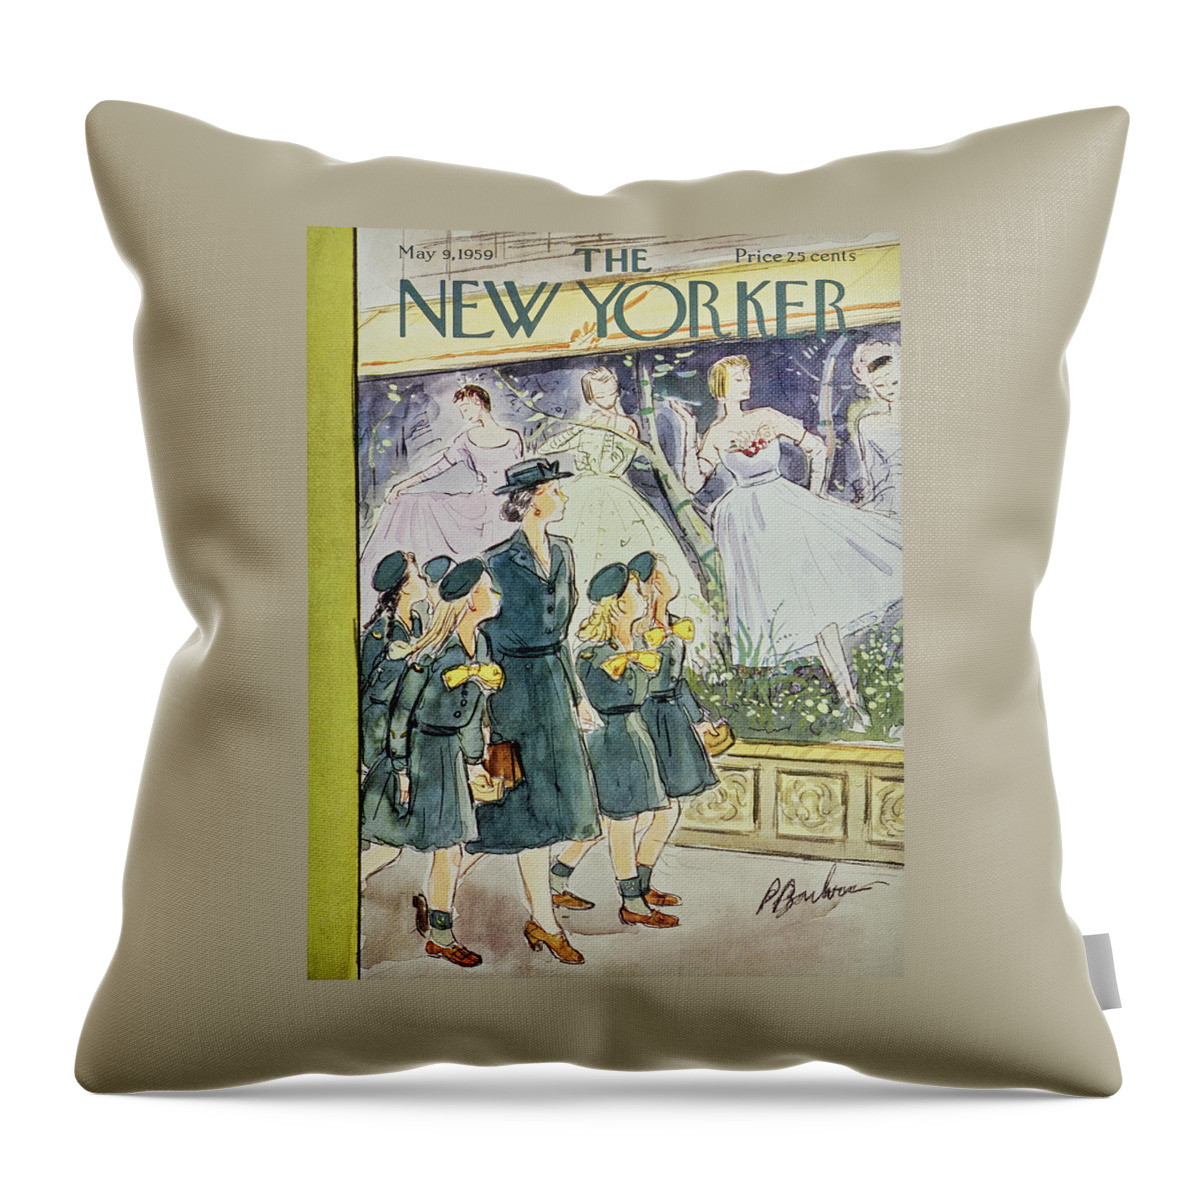 New Yorker May 9 1959 Throw Pillow